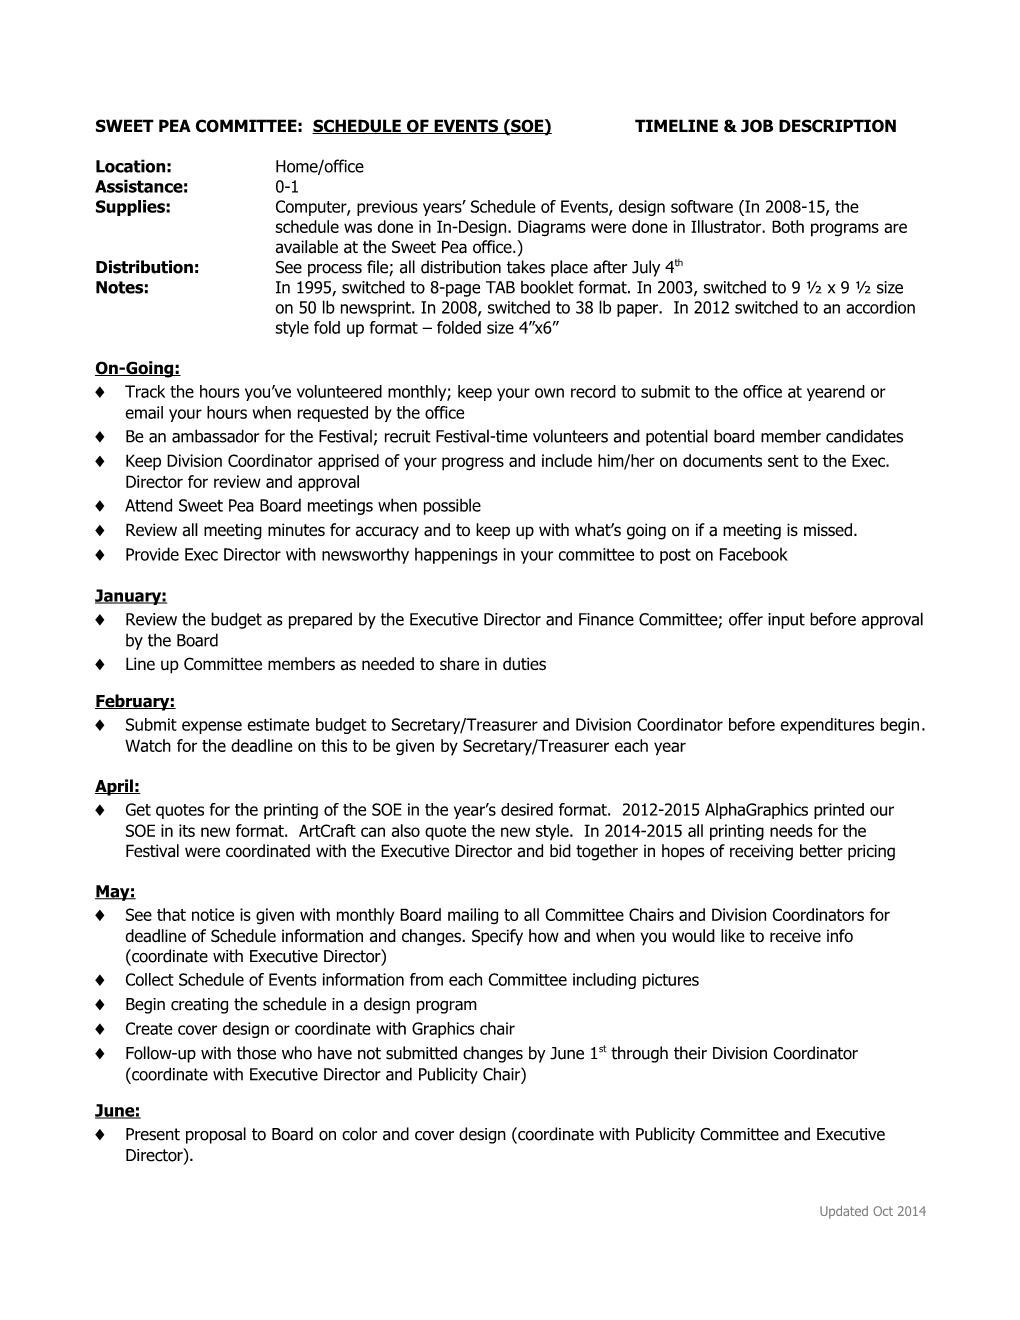 Sweet Pea Committee: Schedule of Events Time Line Job Description 1/96